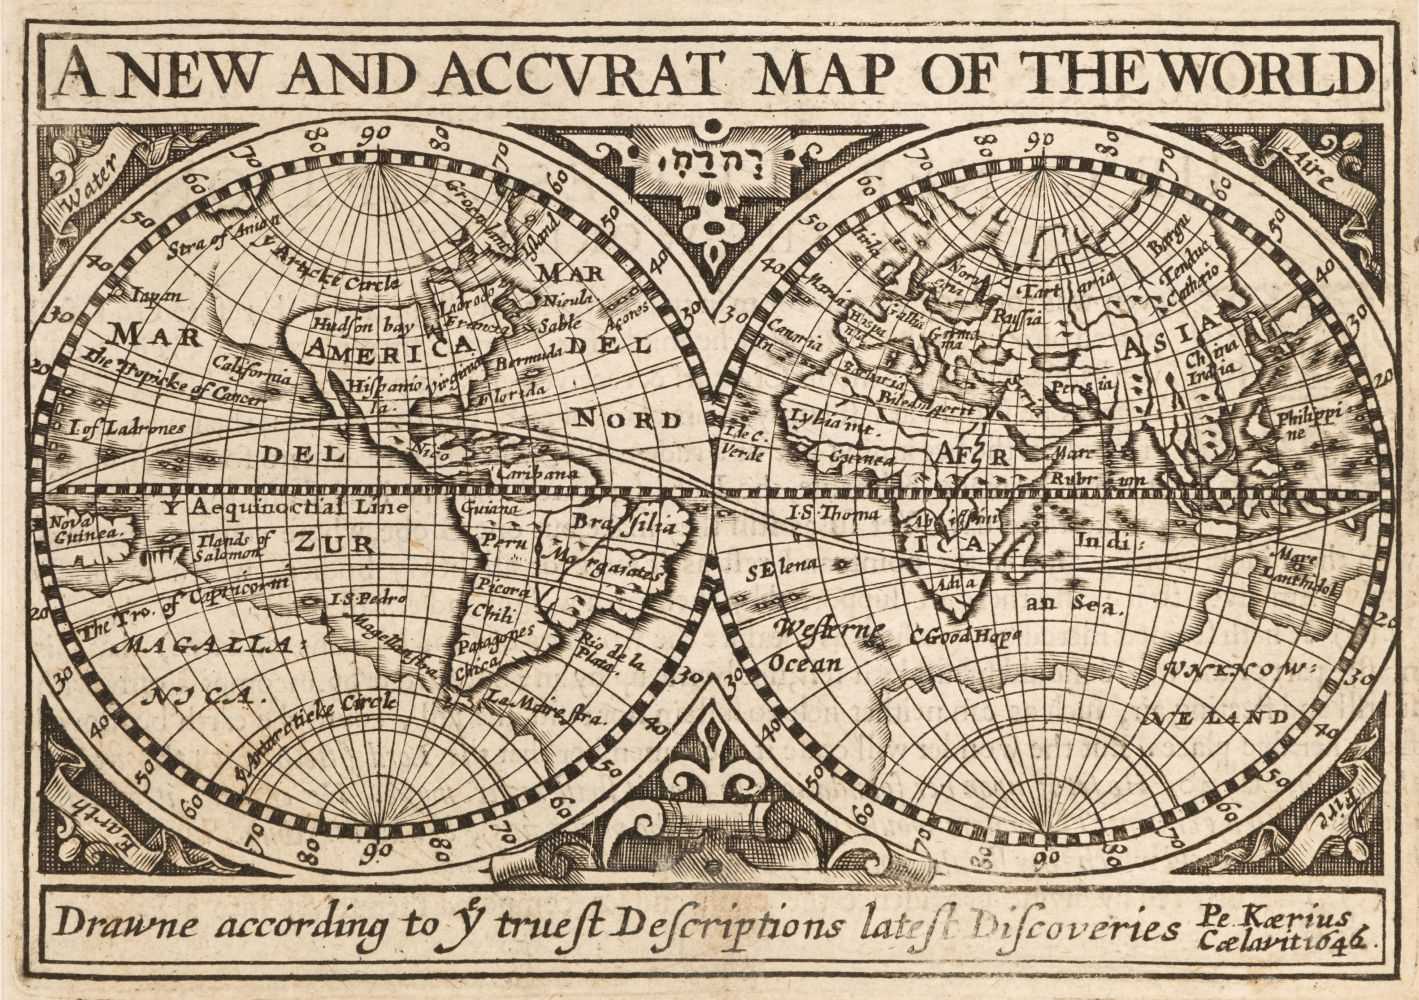 Lot 168 - World. Van den Keere (Pieter), A New and Accurat Map of the World, 1646